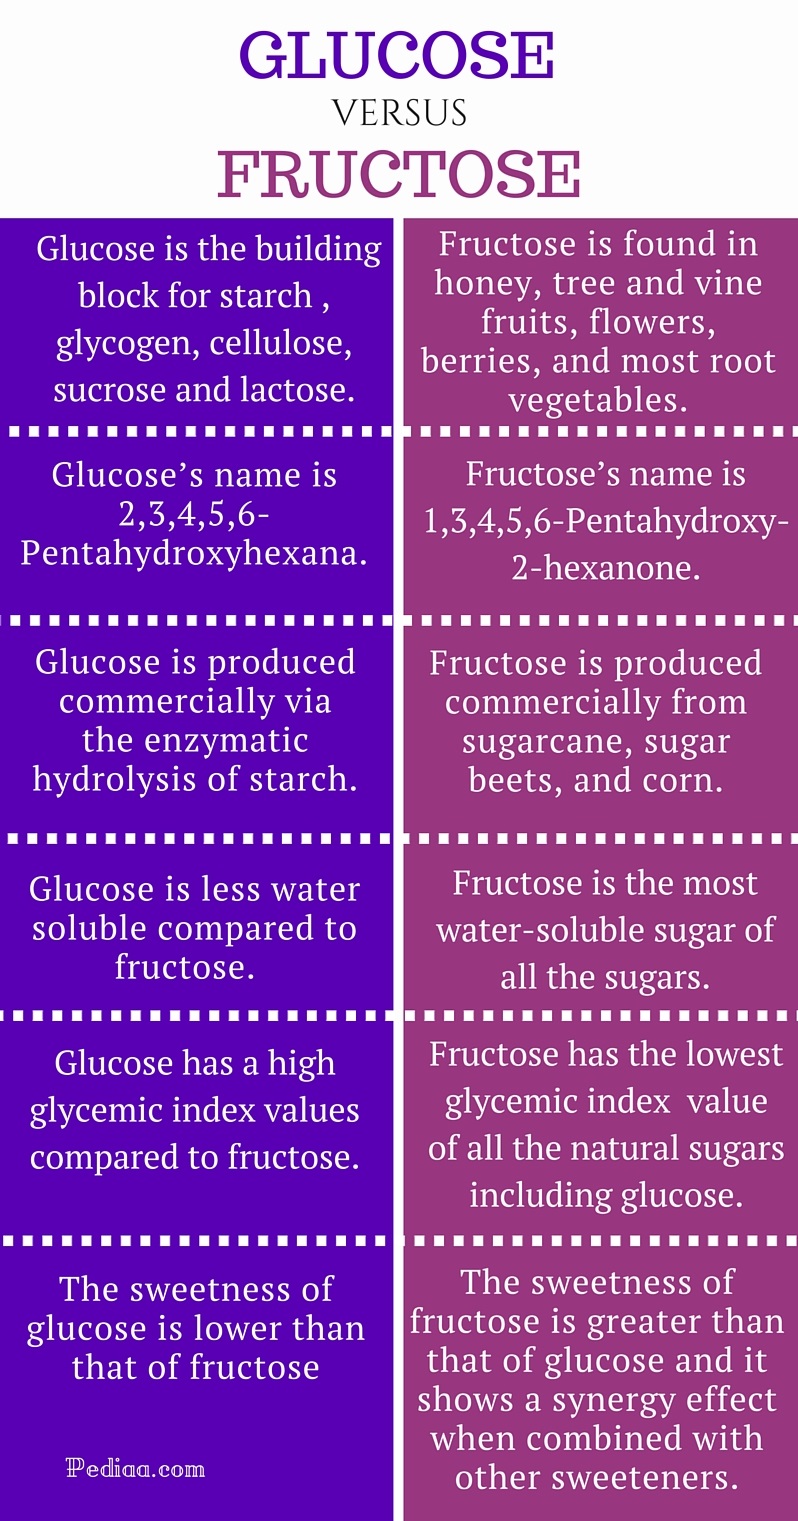 Difference Between Glucose and frutcose - infographic